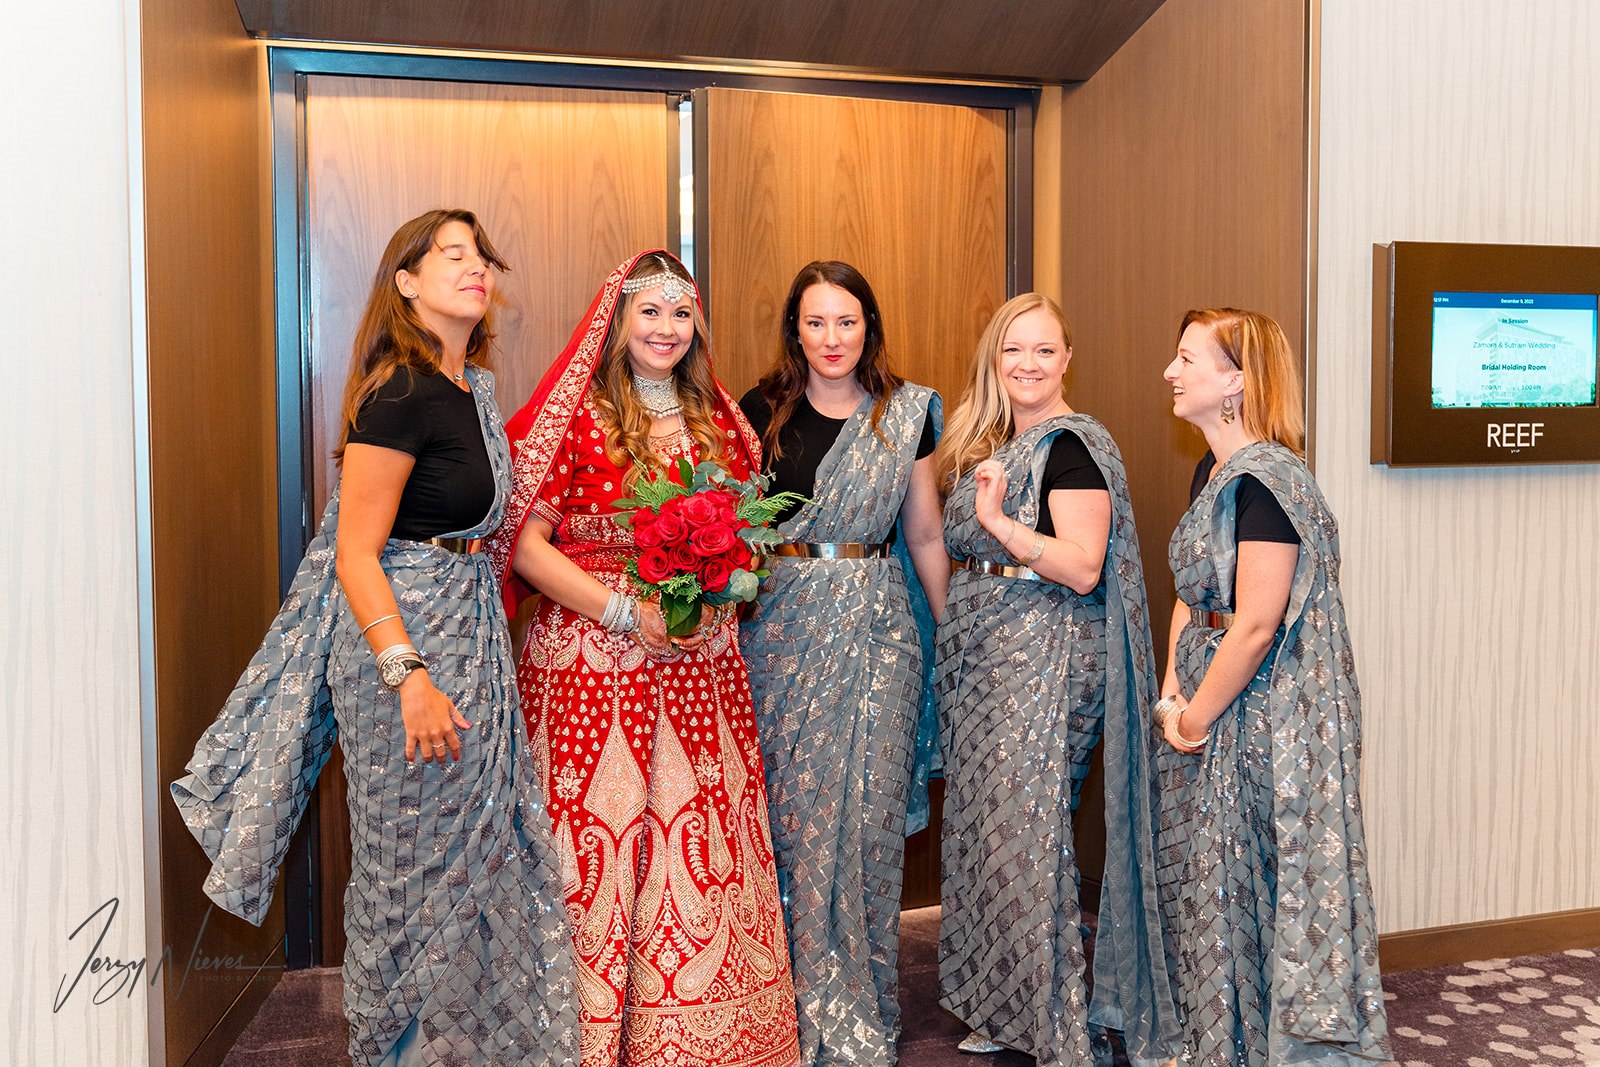 Nicole and her bridesmaids, dressed in traditional Indian wedding attire, smile for the camera in the lobby of Disney Swan Reserve.